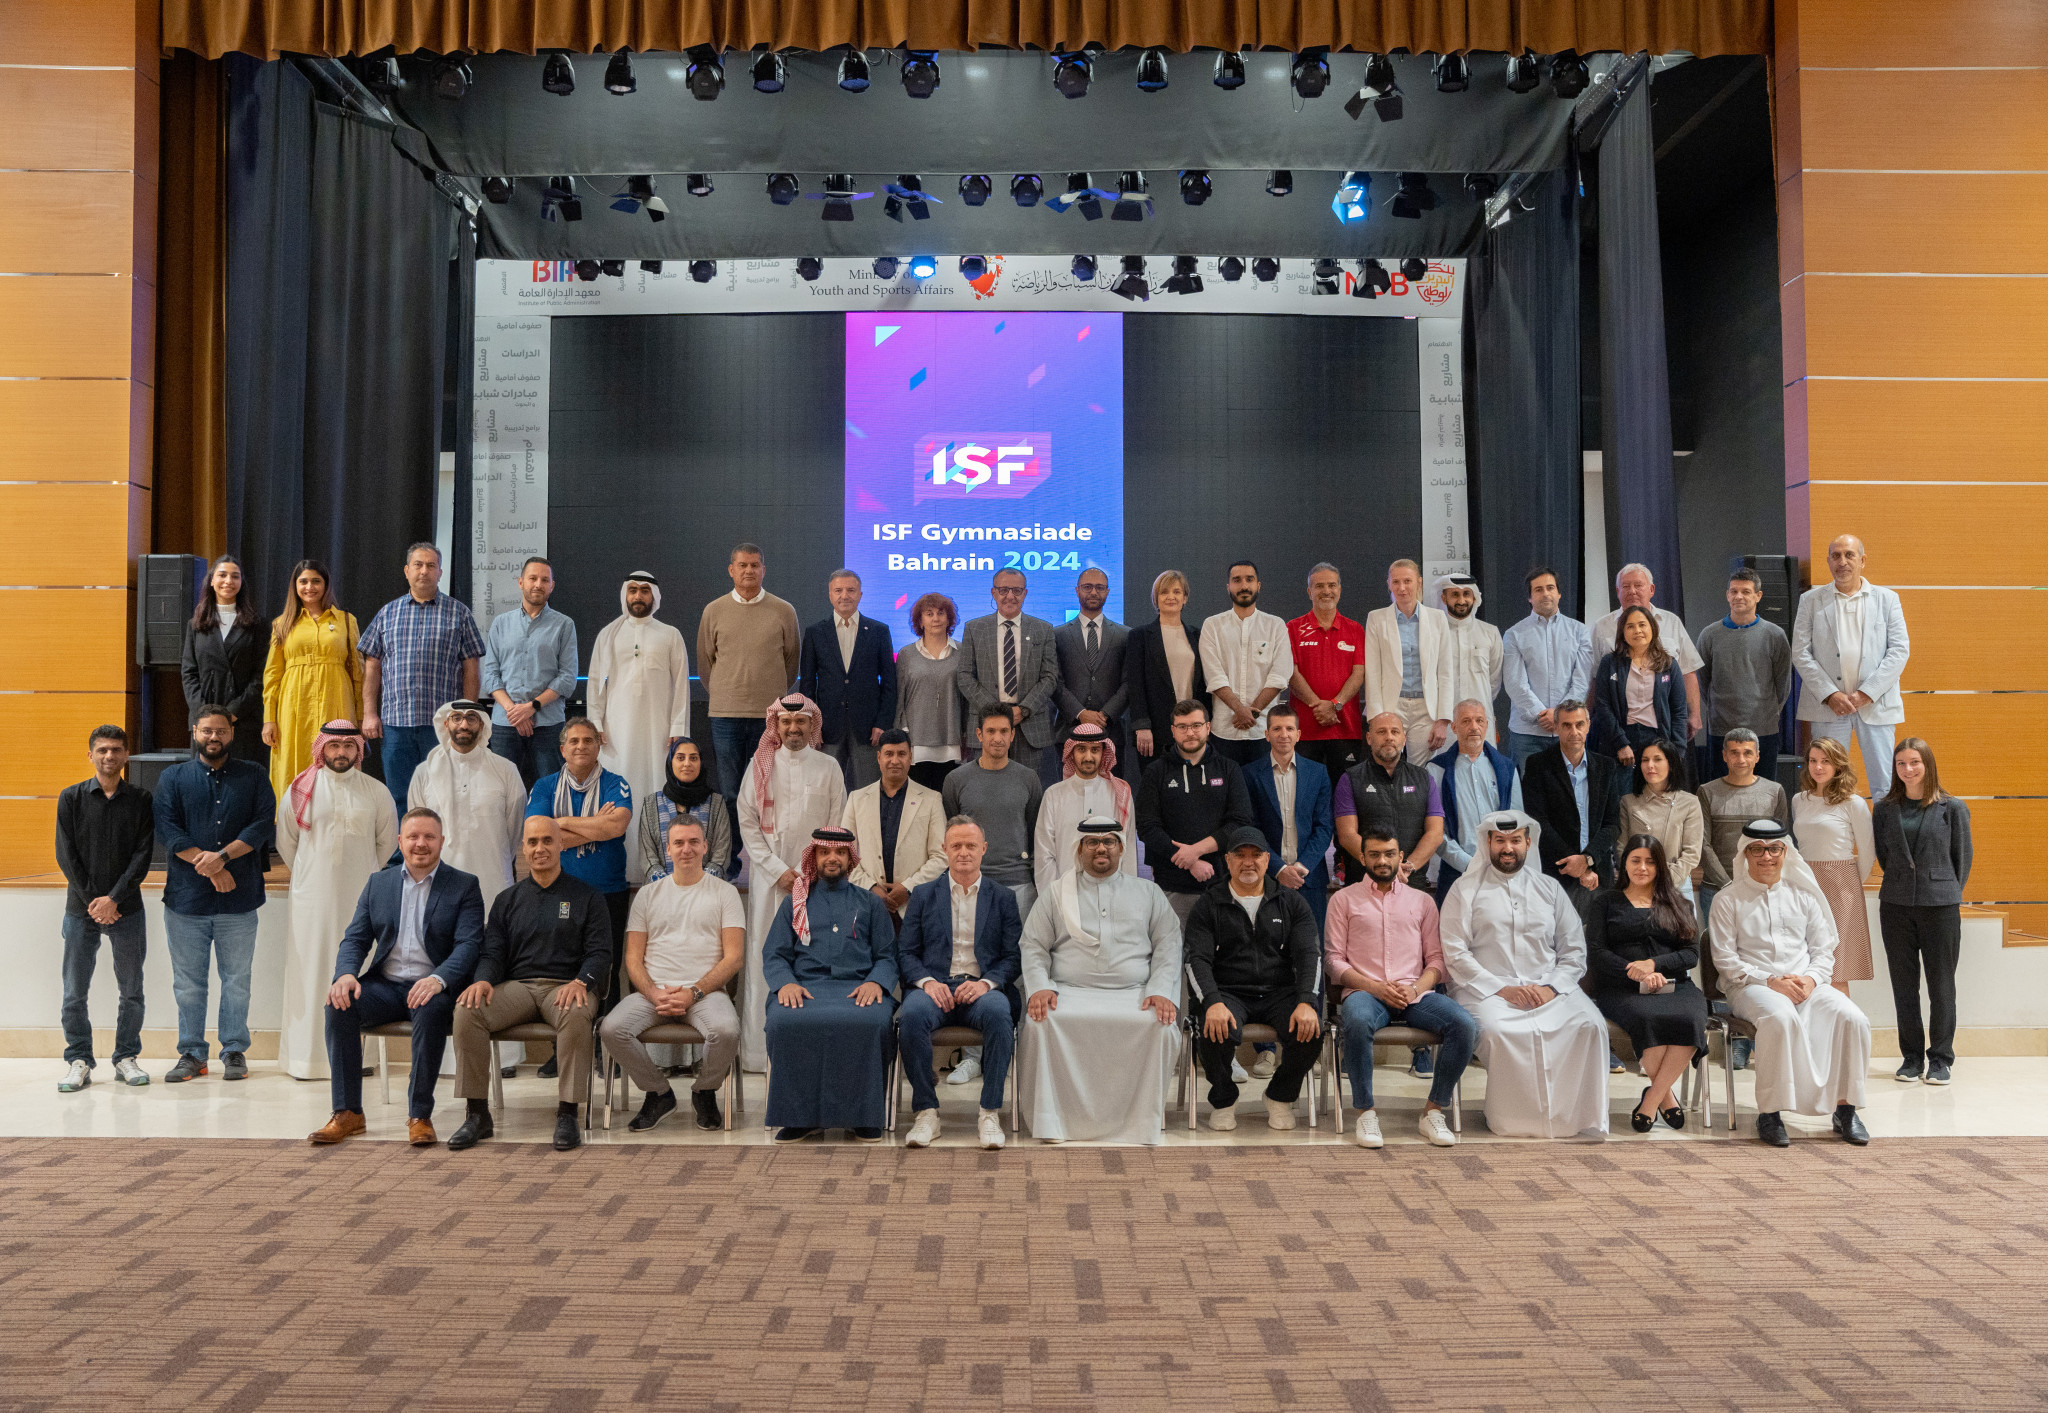 A delegation from the ISF met with the Local Organising Committee and ISF Technical Committee Presidents to discuss preparations for the Bahrain 2024 Gymnasiade ©ISF